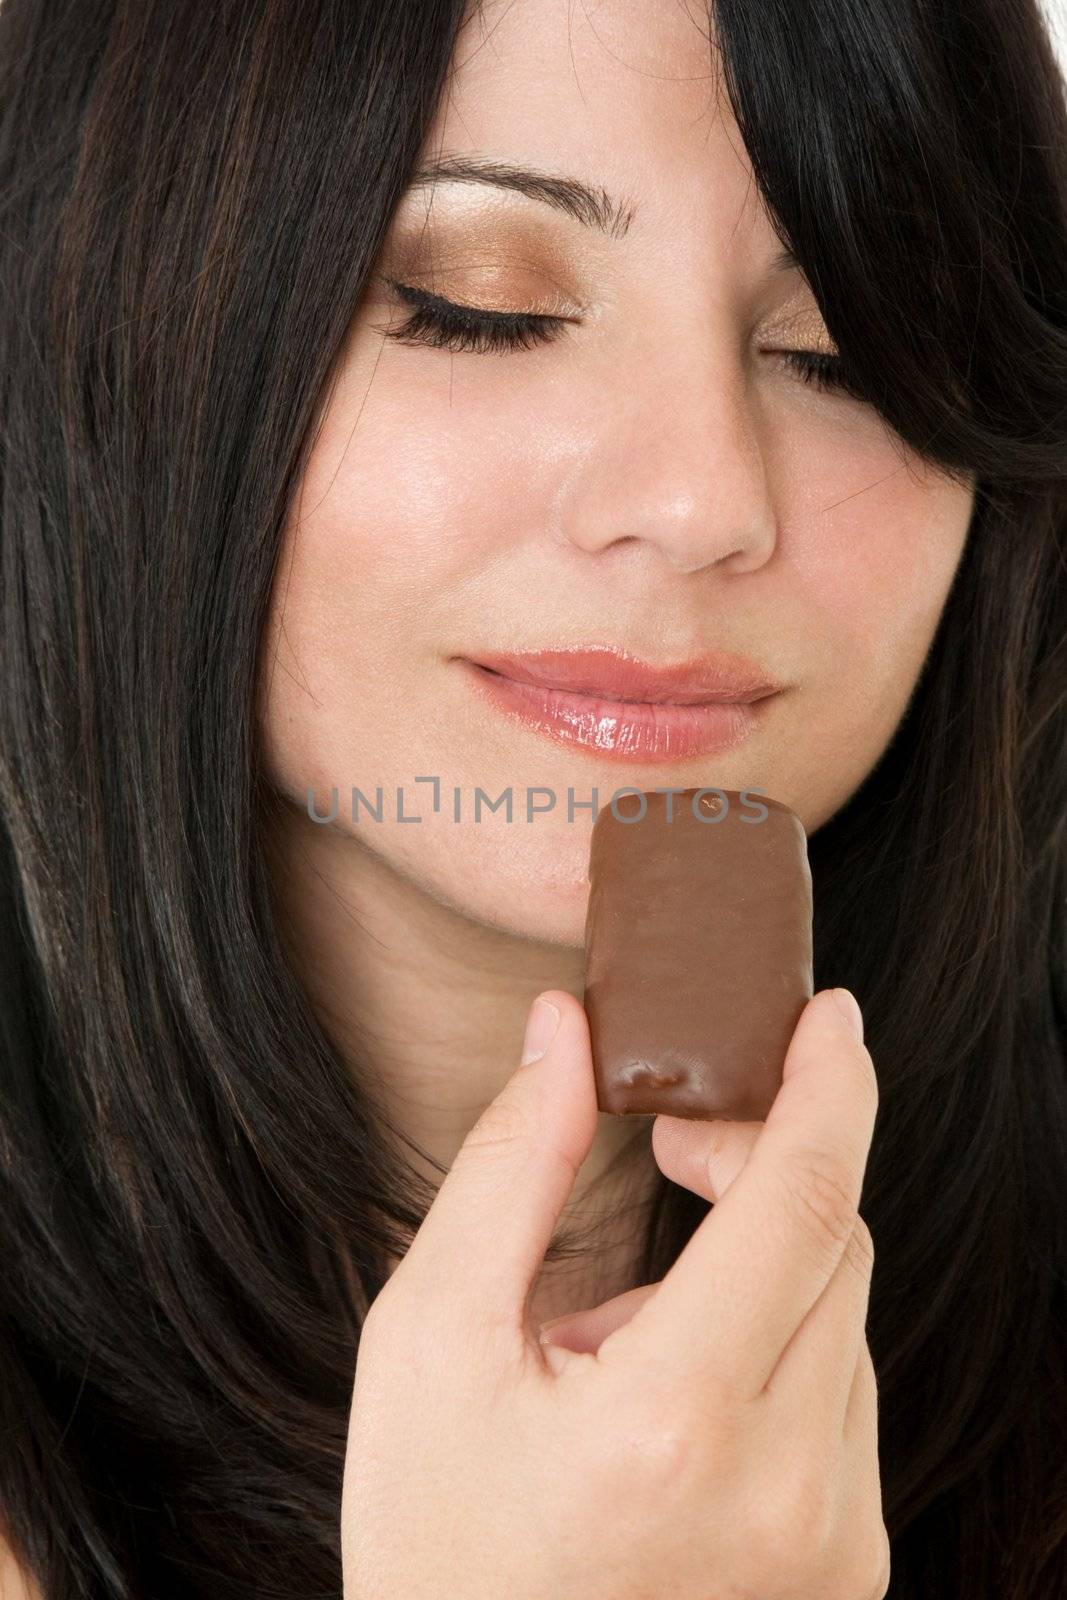 Woman holding a piece of chocolate confection.